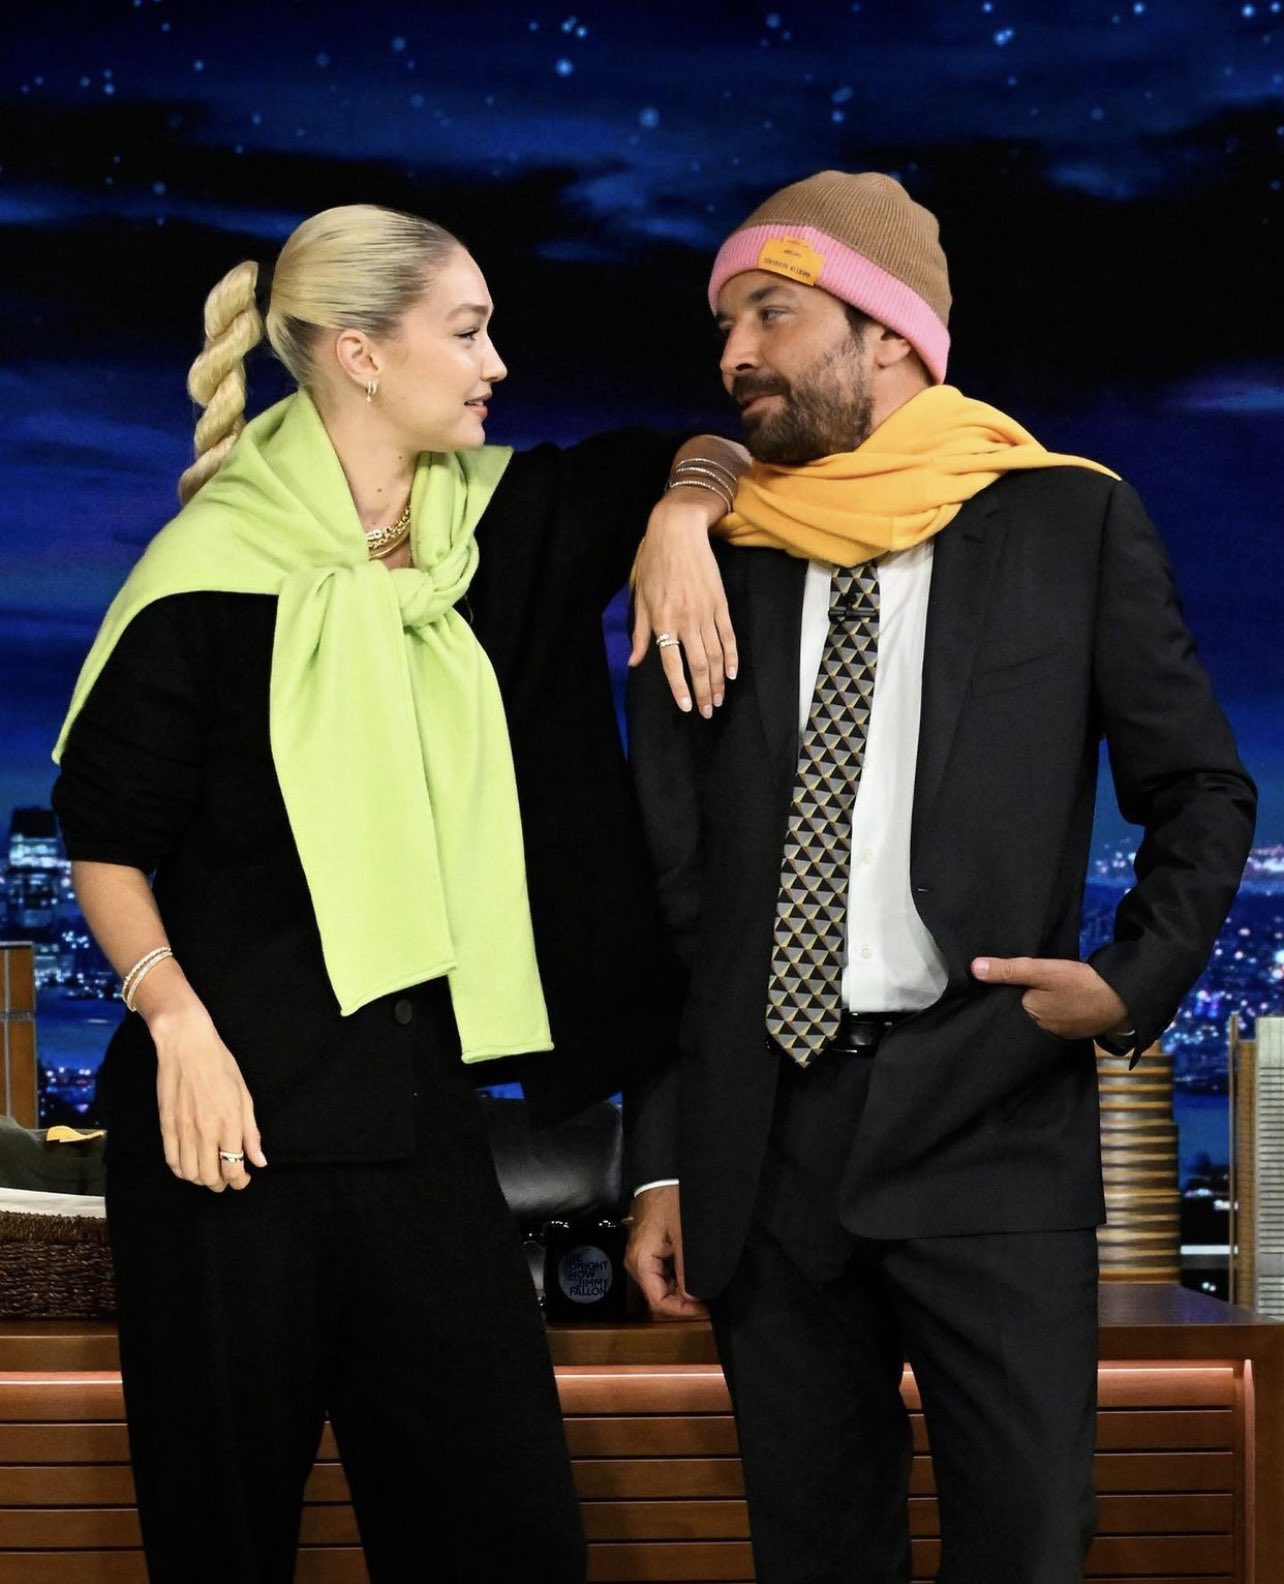 Gigi Hadid appeared on The Tonight Show Starring Jimmy Fallon in